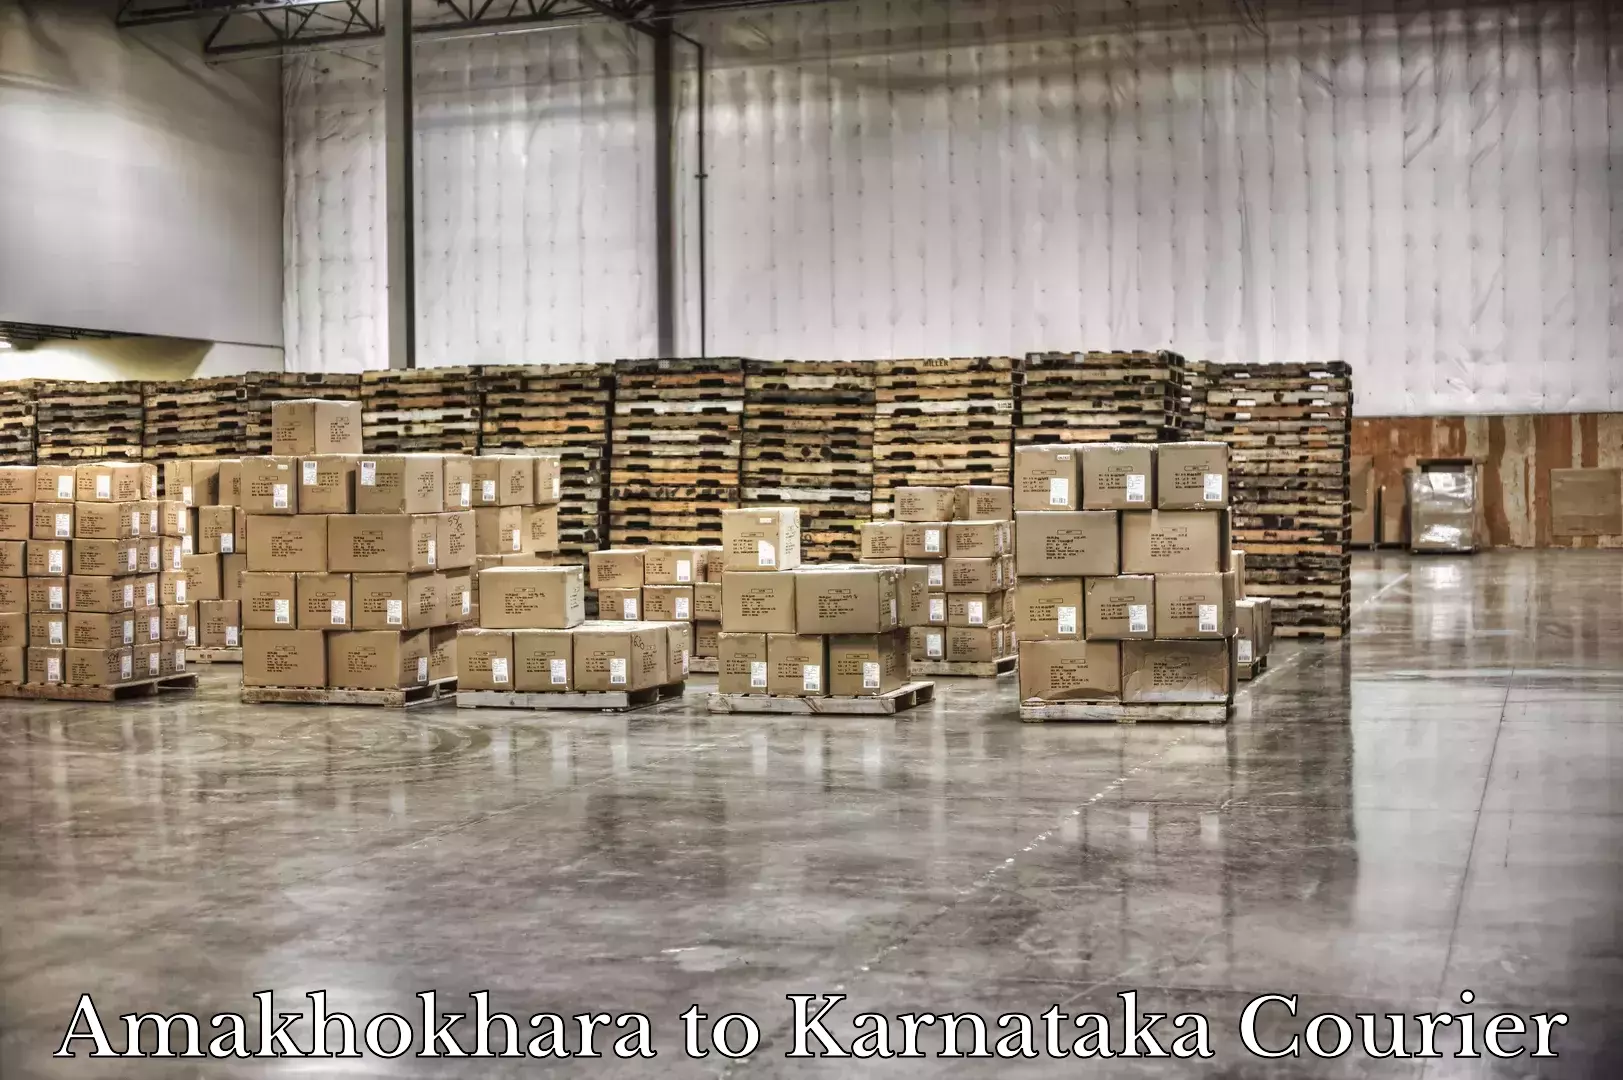 Baggage shipping experience in Amakhokhara to Madhugiri